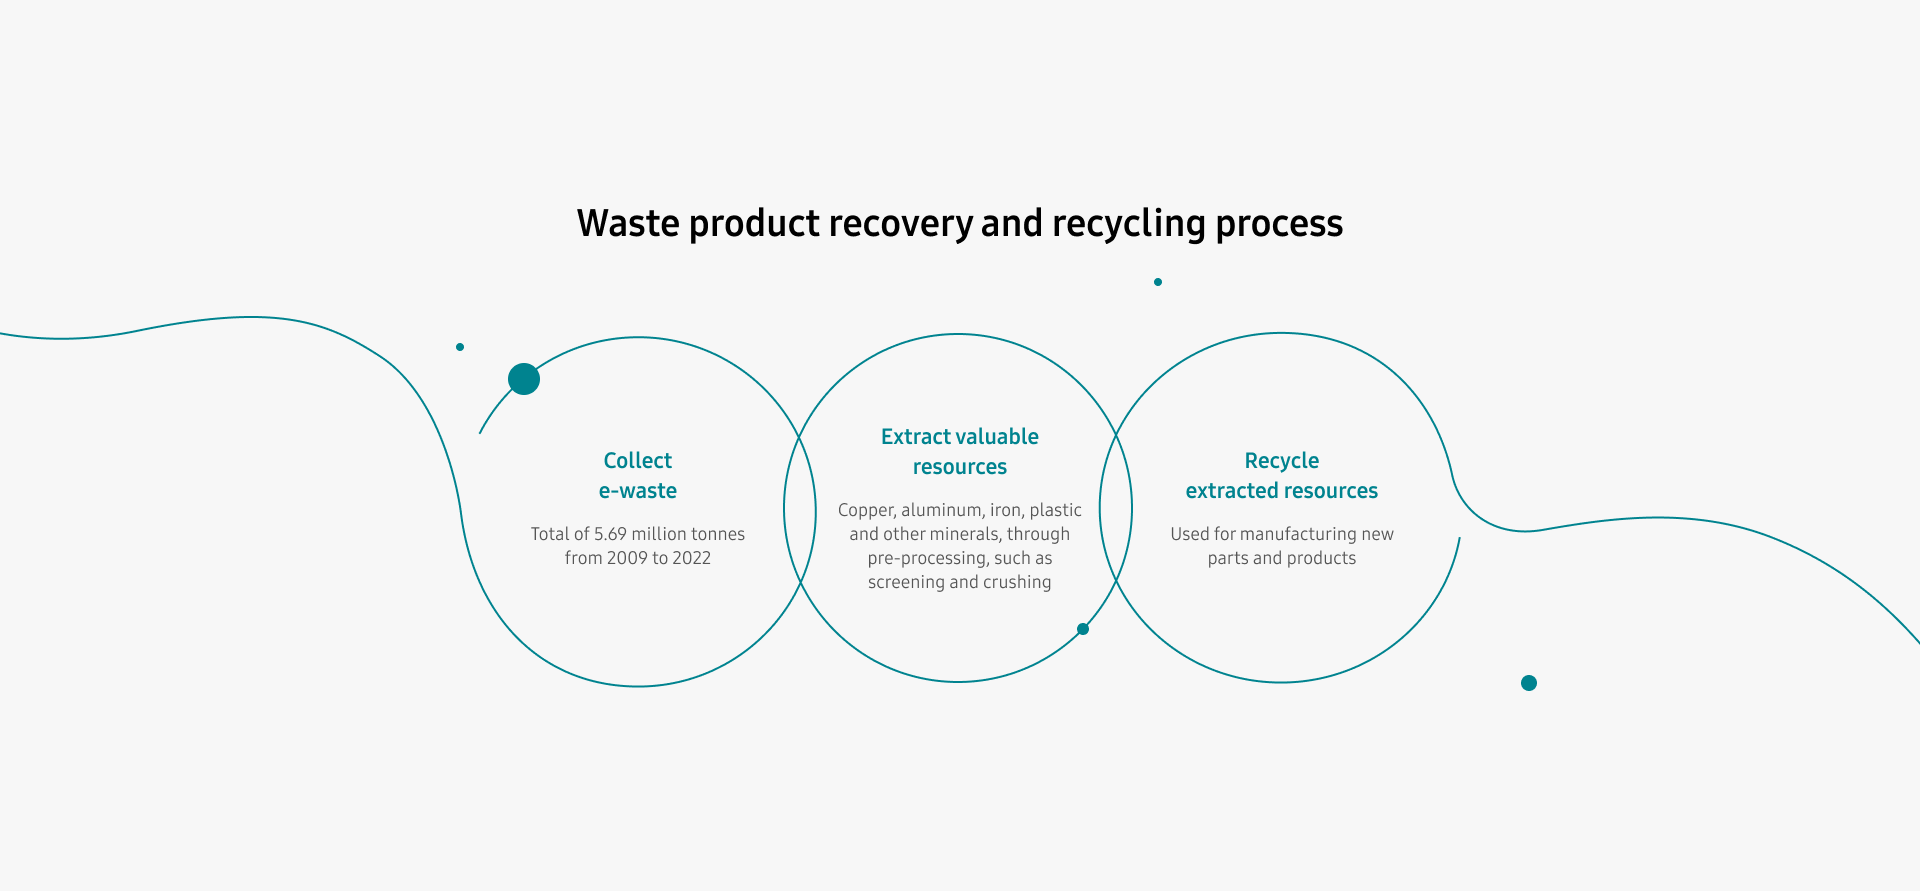 Collect e-waste Total of 5.07 million tonnes from 2009 to 2021, Extract valuable resources Cooper, aluminum, iron, plastic and other minerals, through pre-processing, such as screening and crushing, Recycle extracted resources Used for manufacturing new parts and products